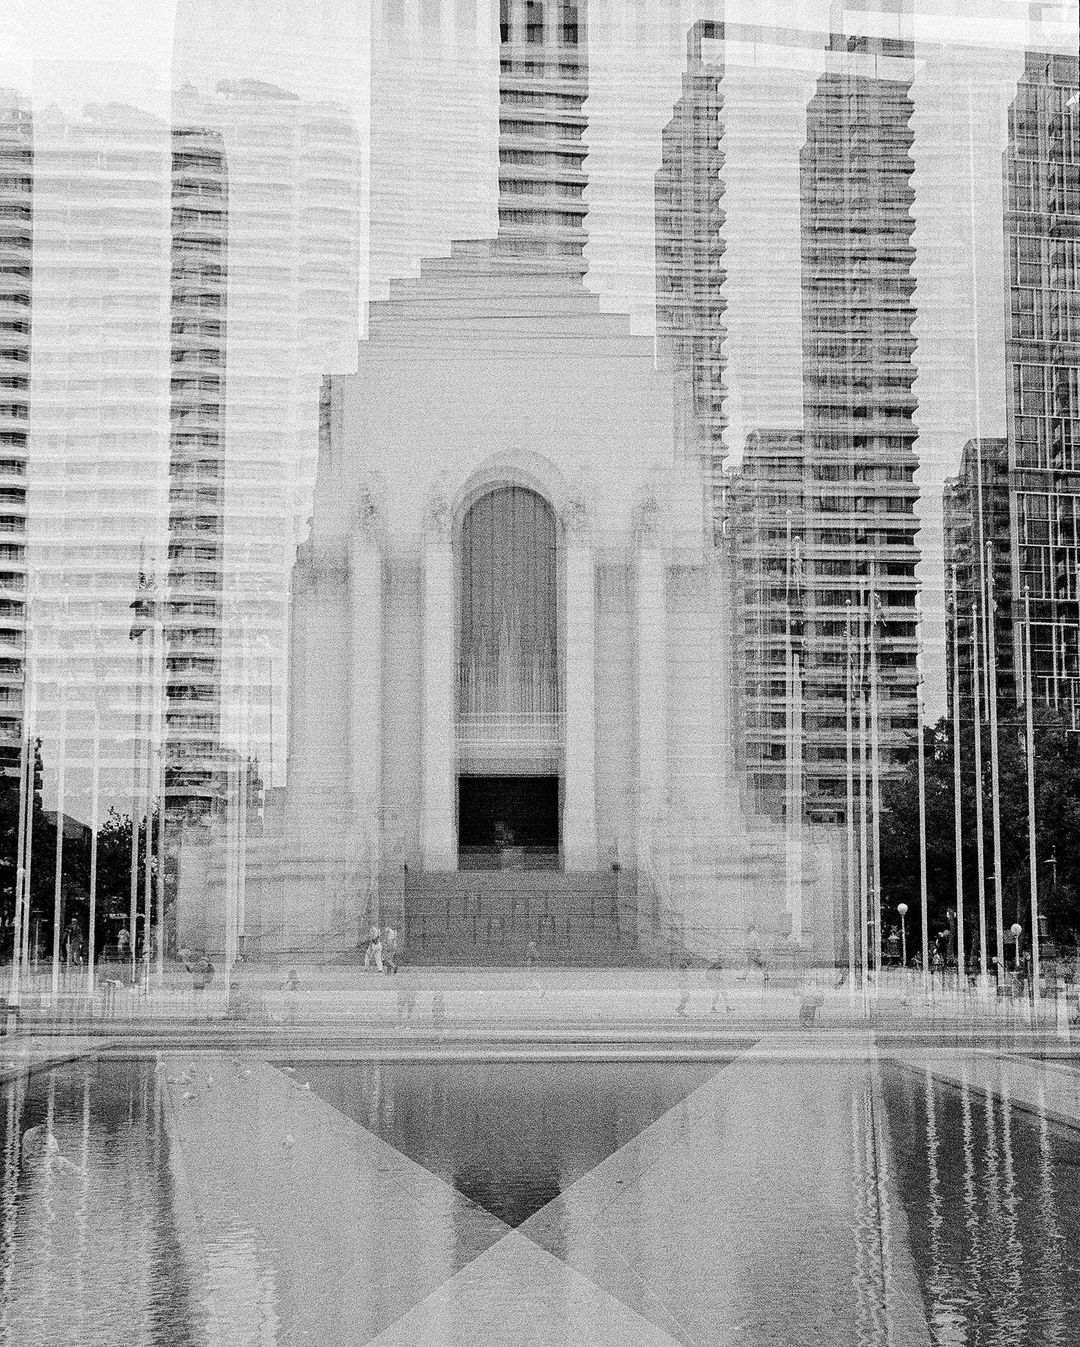  mattweddis Anzac Memorial, Hyde Park, Sydney (@anzac_memorial ). 4 image, in camera, multiple exposure on @ilfordphoto HP5 in 35mm. I’ve been enjoying the incredible multiple exposures of @frankmachalowski and have been wanting to try to create some interesting multiple exposures if my own. This is a first attempt. #anzacmemorialhydeparksydney #anzacmemorial #hydeparksydney #sydney #australia #multipleexposure #ilford #ilfordphoto #fridayfavourites #anewstart #hp5plus #hp5 #iso400 #35mmfilm #35mm #blackandwhitephotography #multipleexposurephotography #filmphotography #photowalk